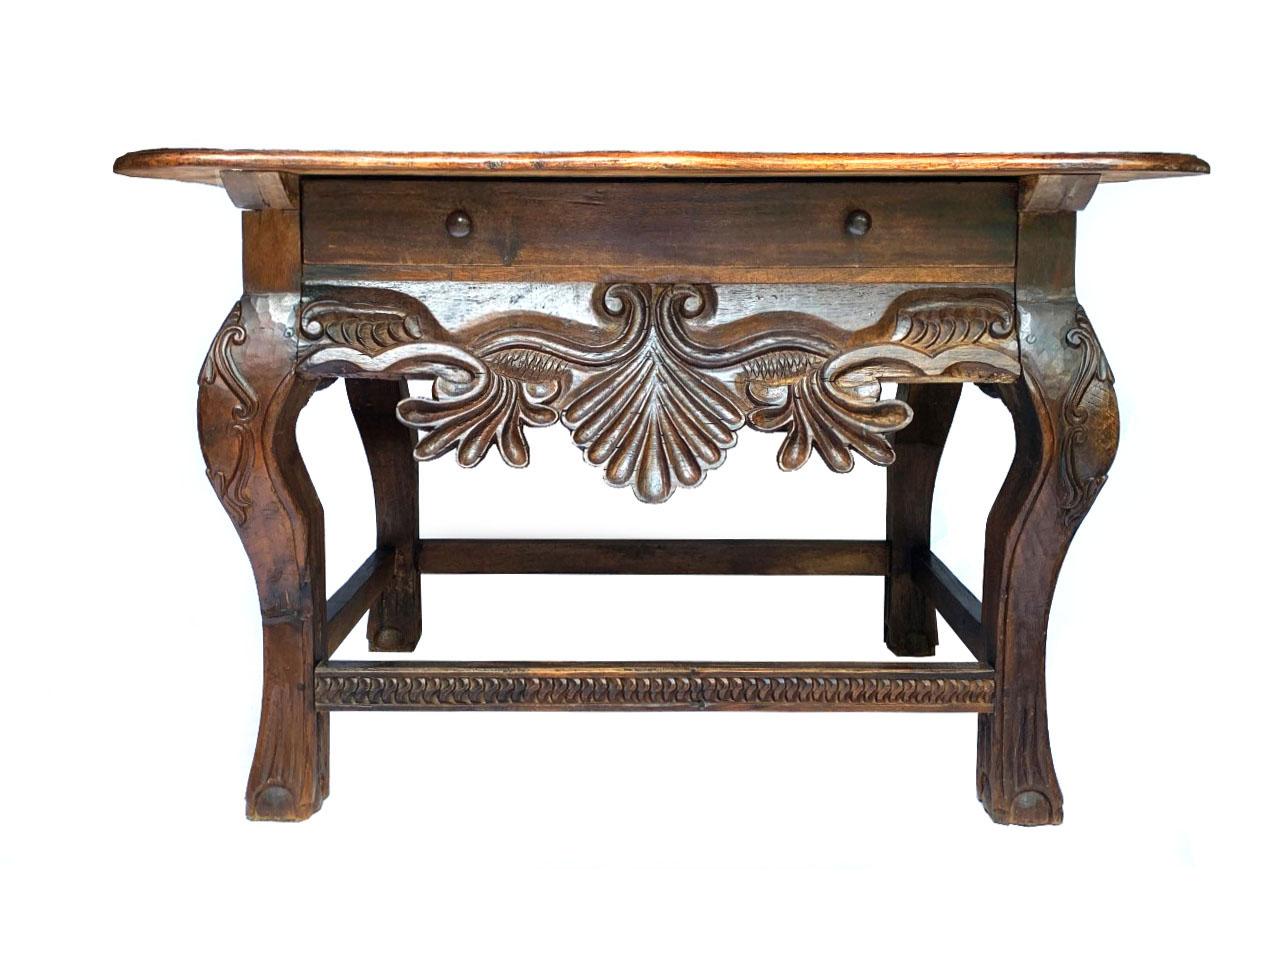 Outstanding Spanish Colonial 18th Century Presentation Hall Table 
Richly carved with motifs of shells, rocailles and scrolls. 
Arched sturdy legs carved with palm and scroll motifs. 
Table top with wavy edges over a large drawer with turned wooden